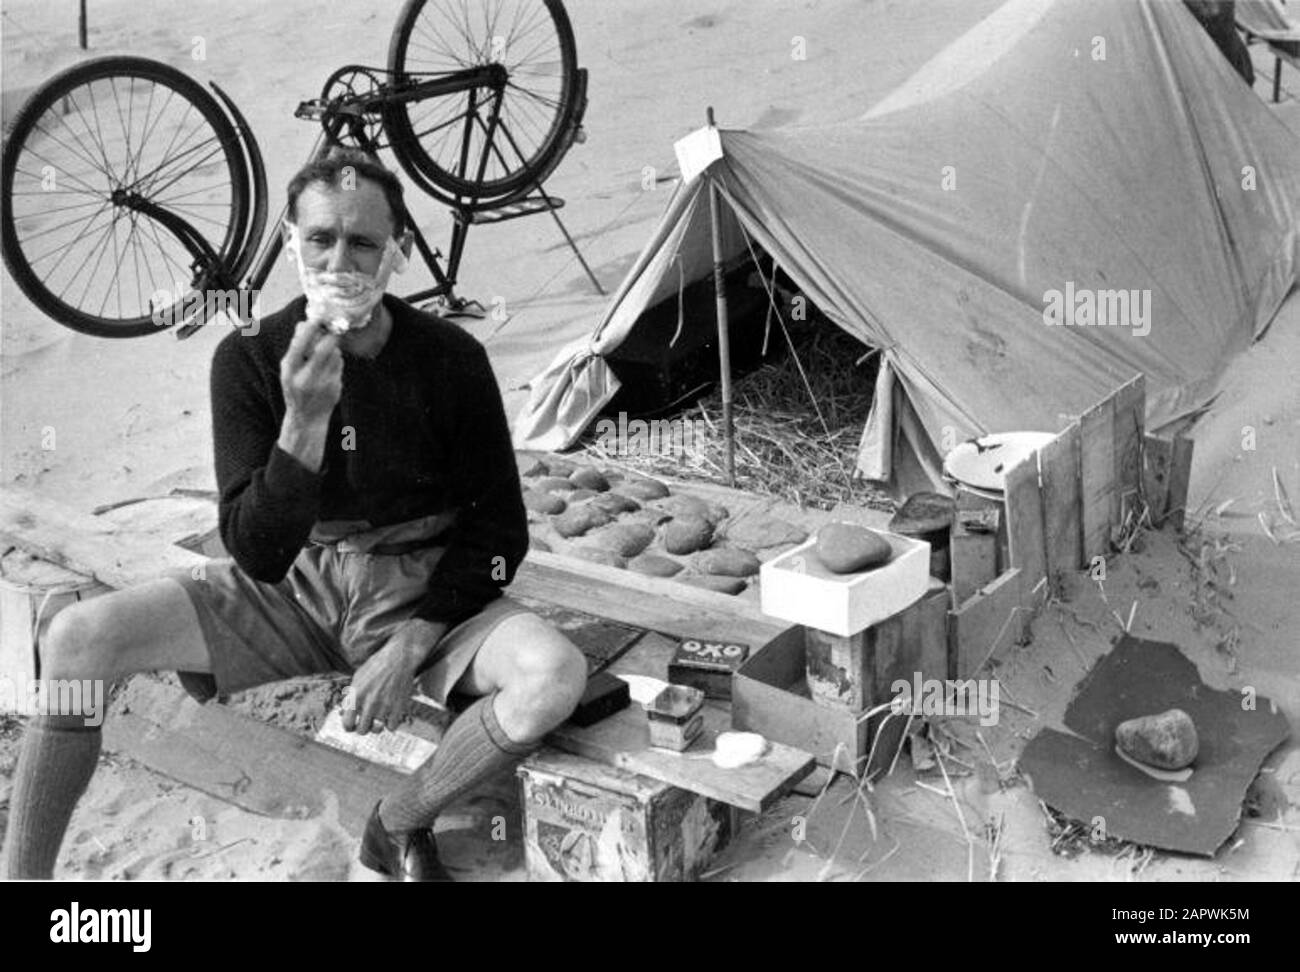 A camper shaves at his tent. In the background there is a bike upside down in the sand. England, circa 1925-1935. Stock Photo